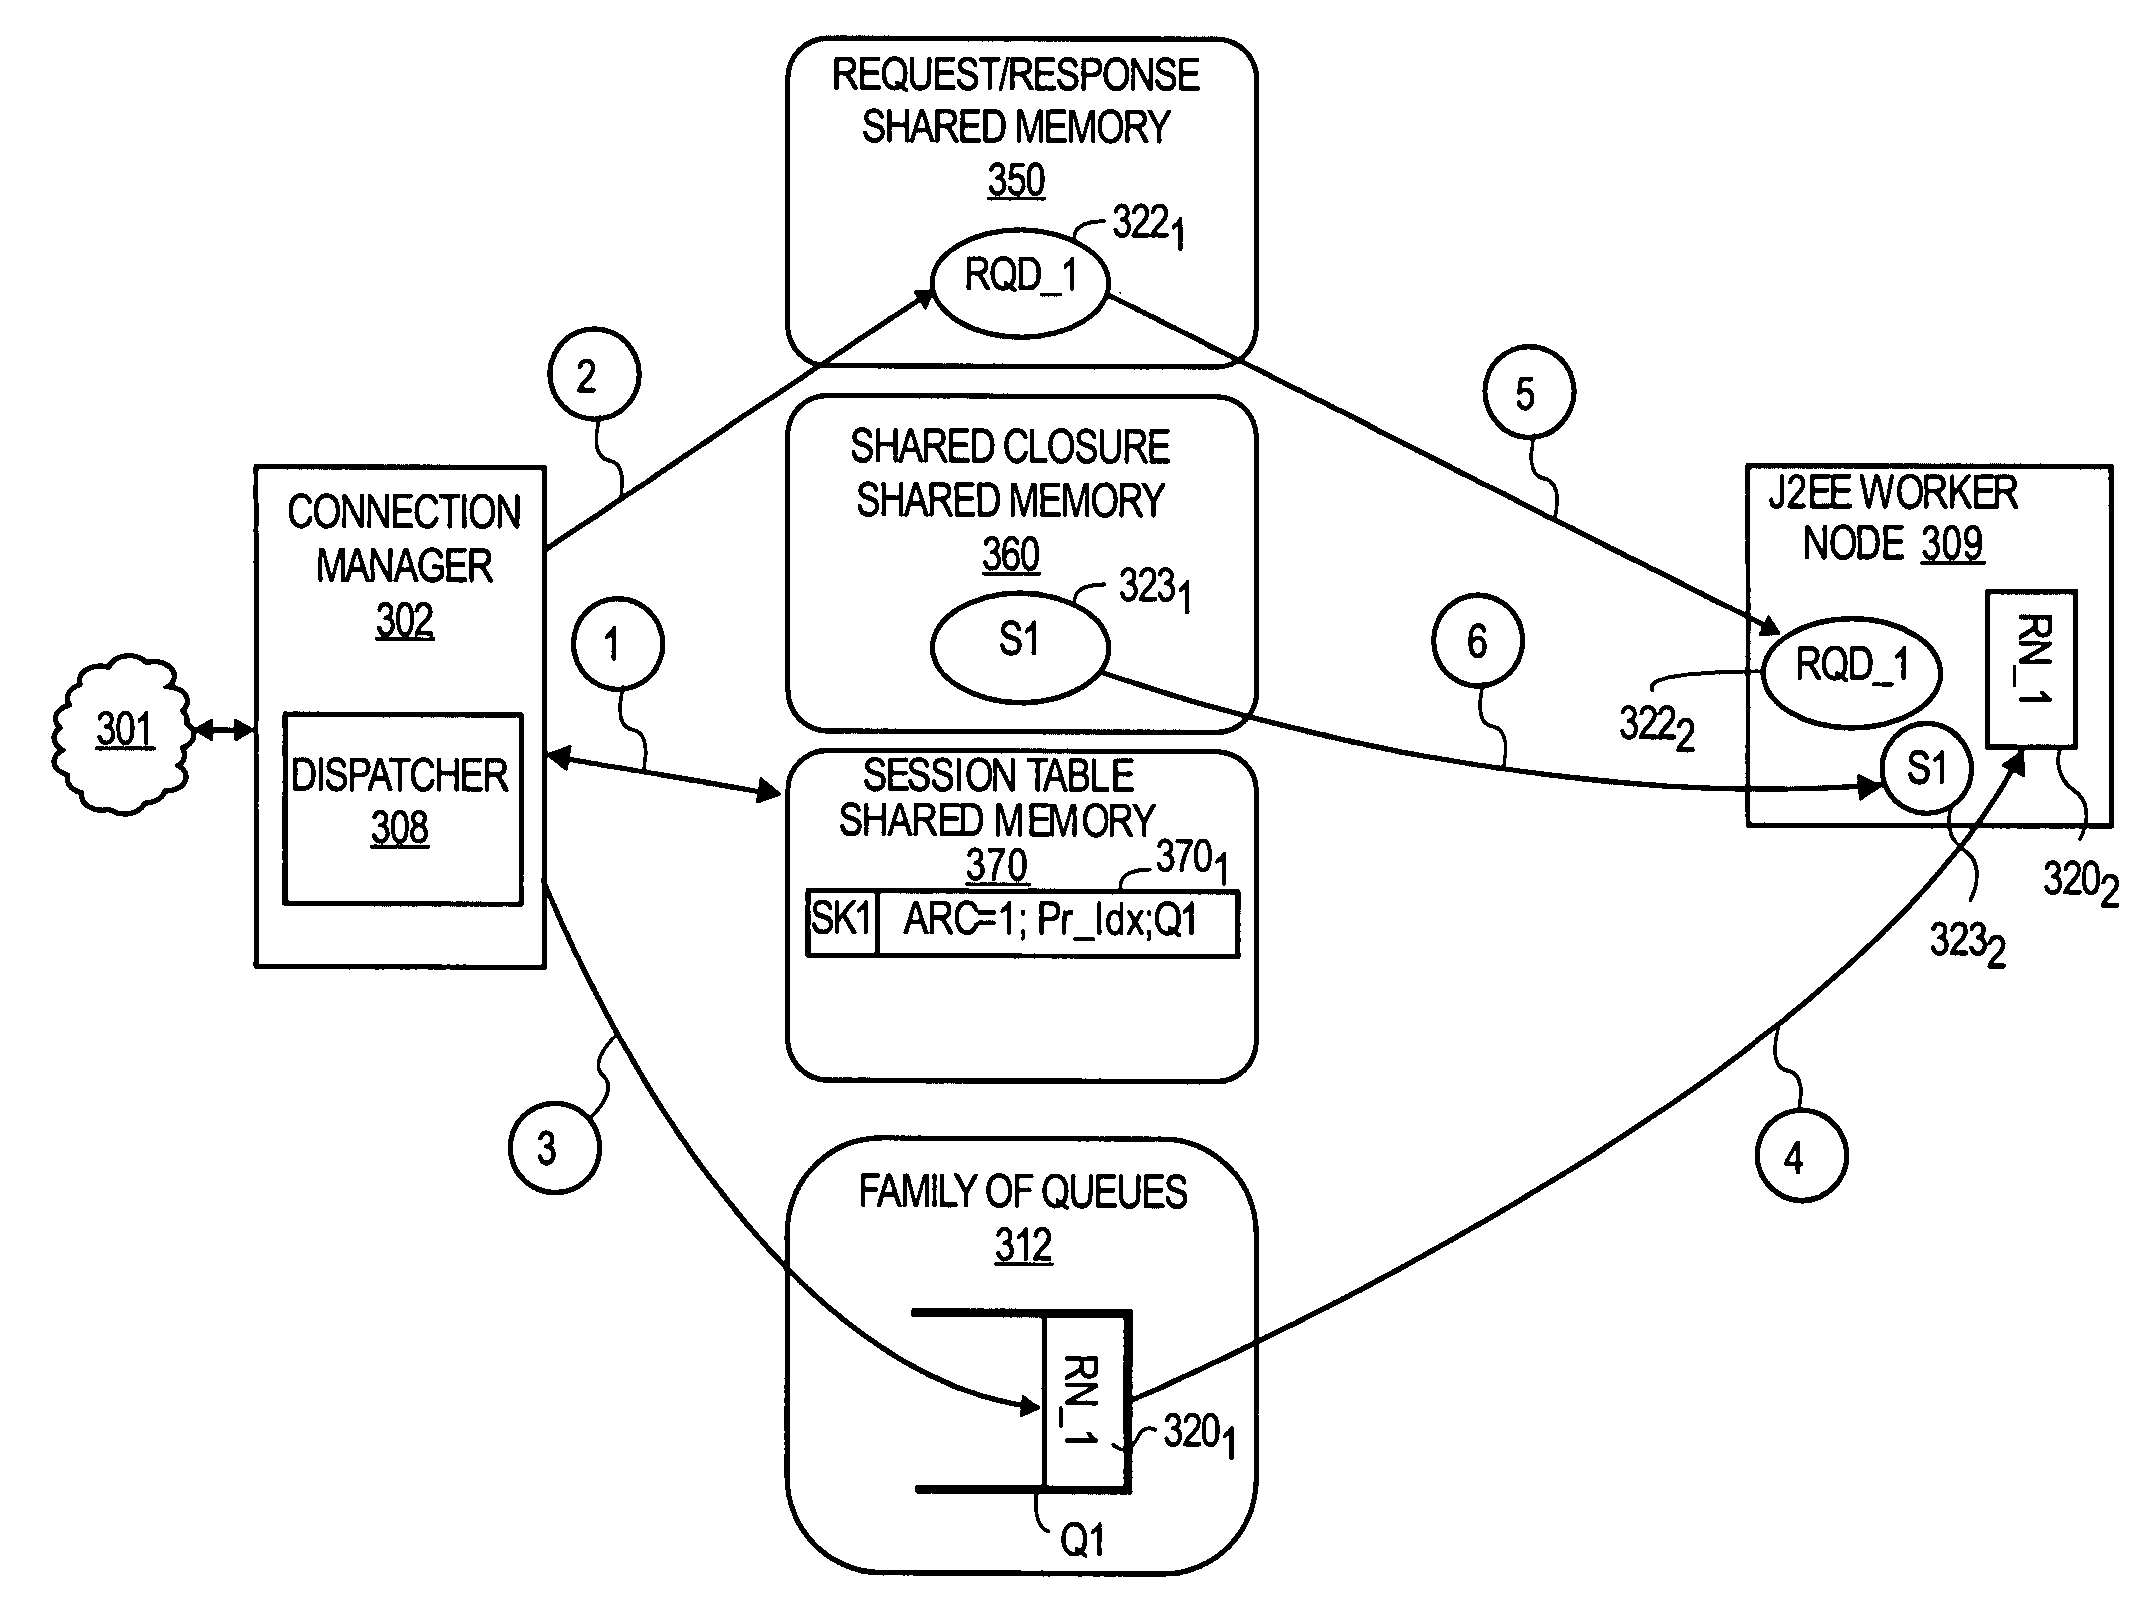 Connection manager capable of supporting both distributed computing sessions and non distributed computing sessions